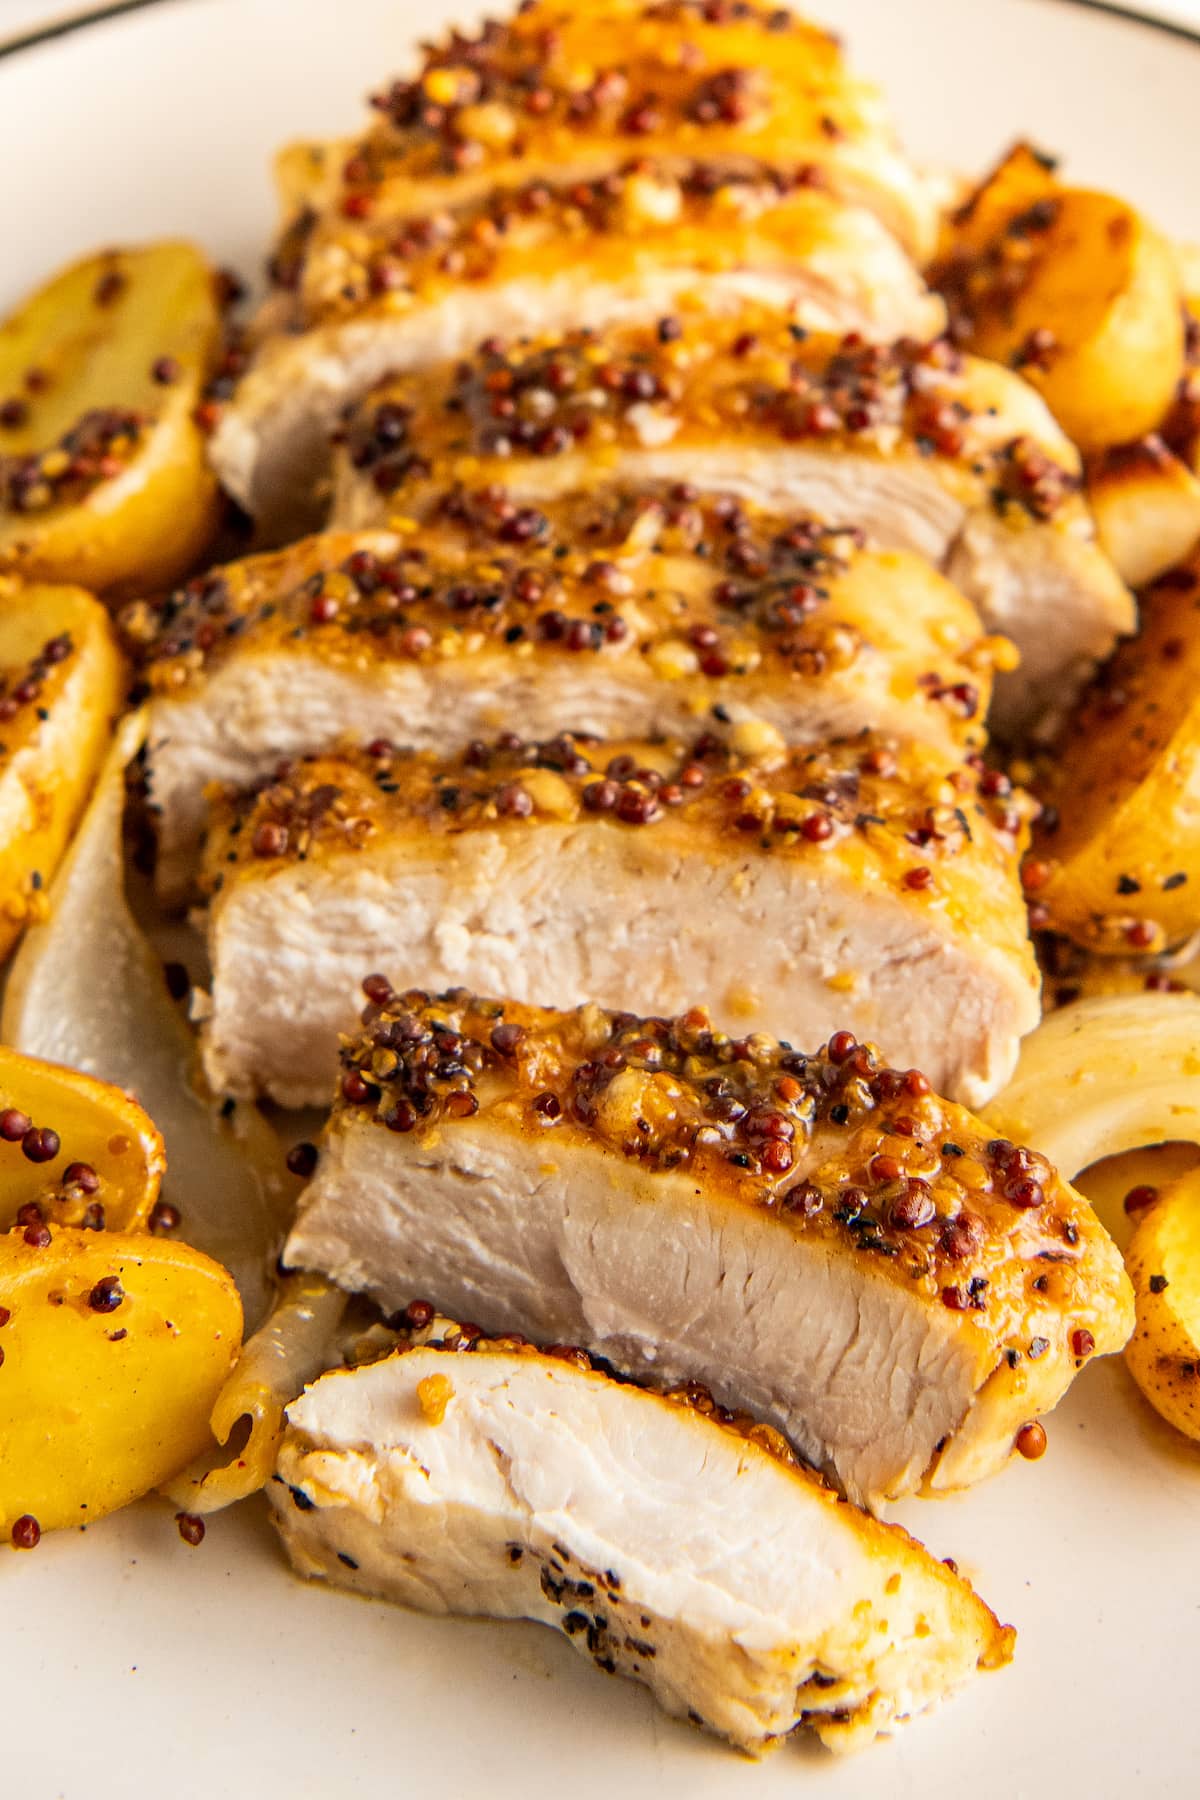 Honey mustard chicken sliced on a plate with potatoes.